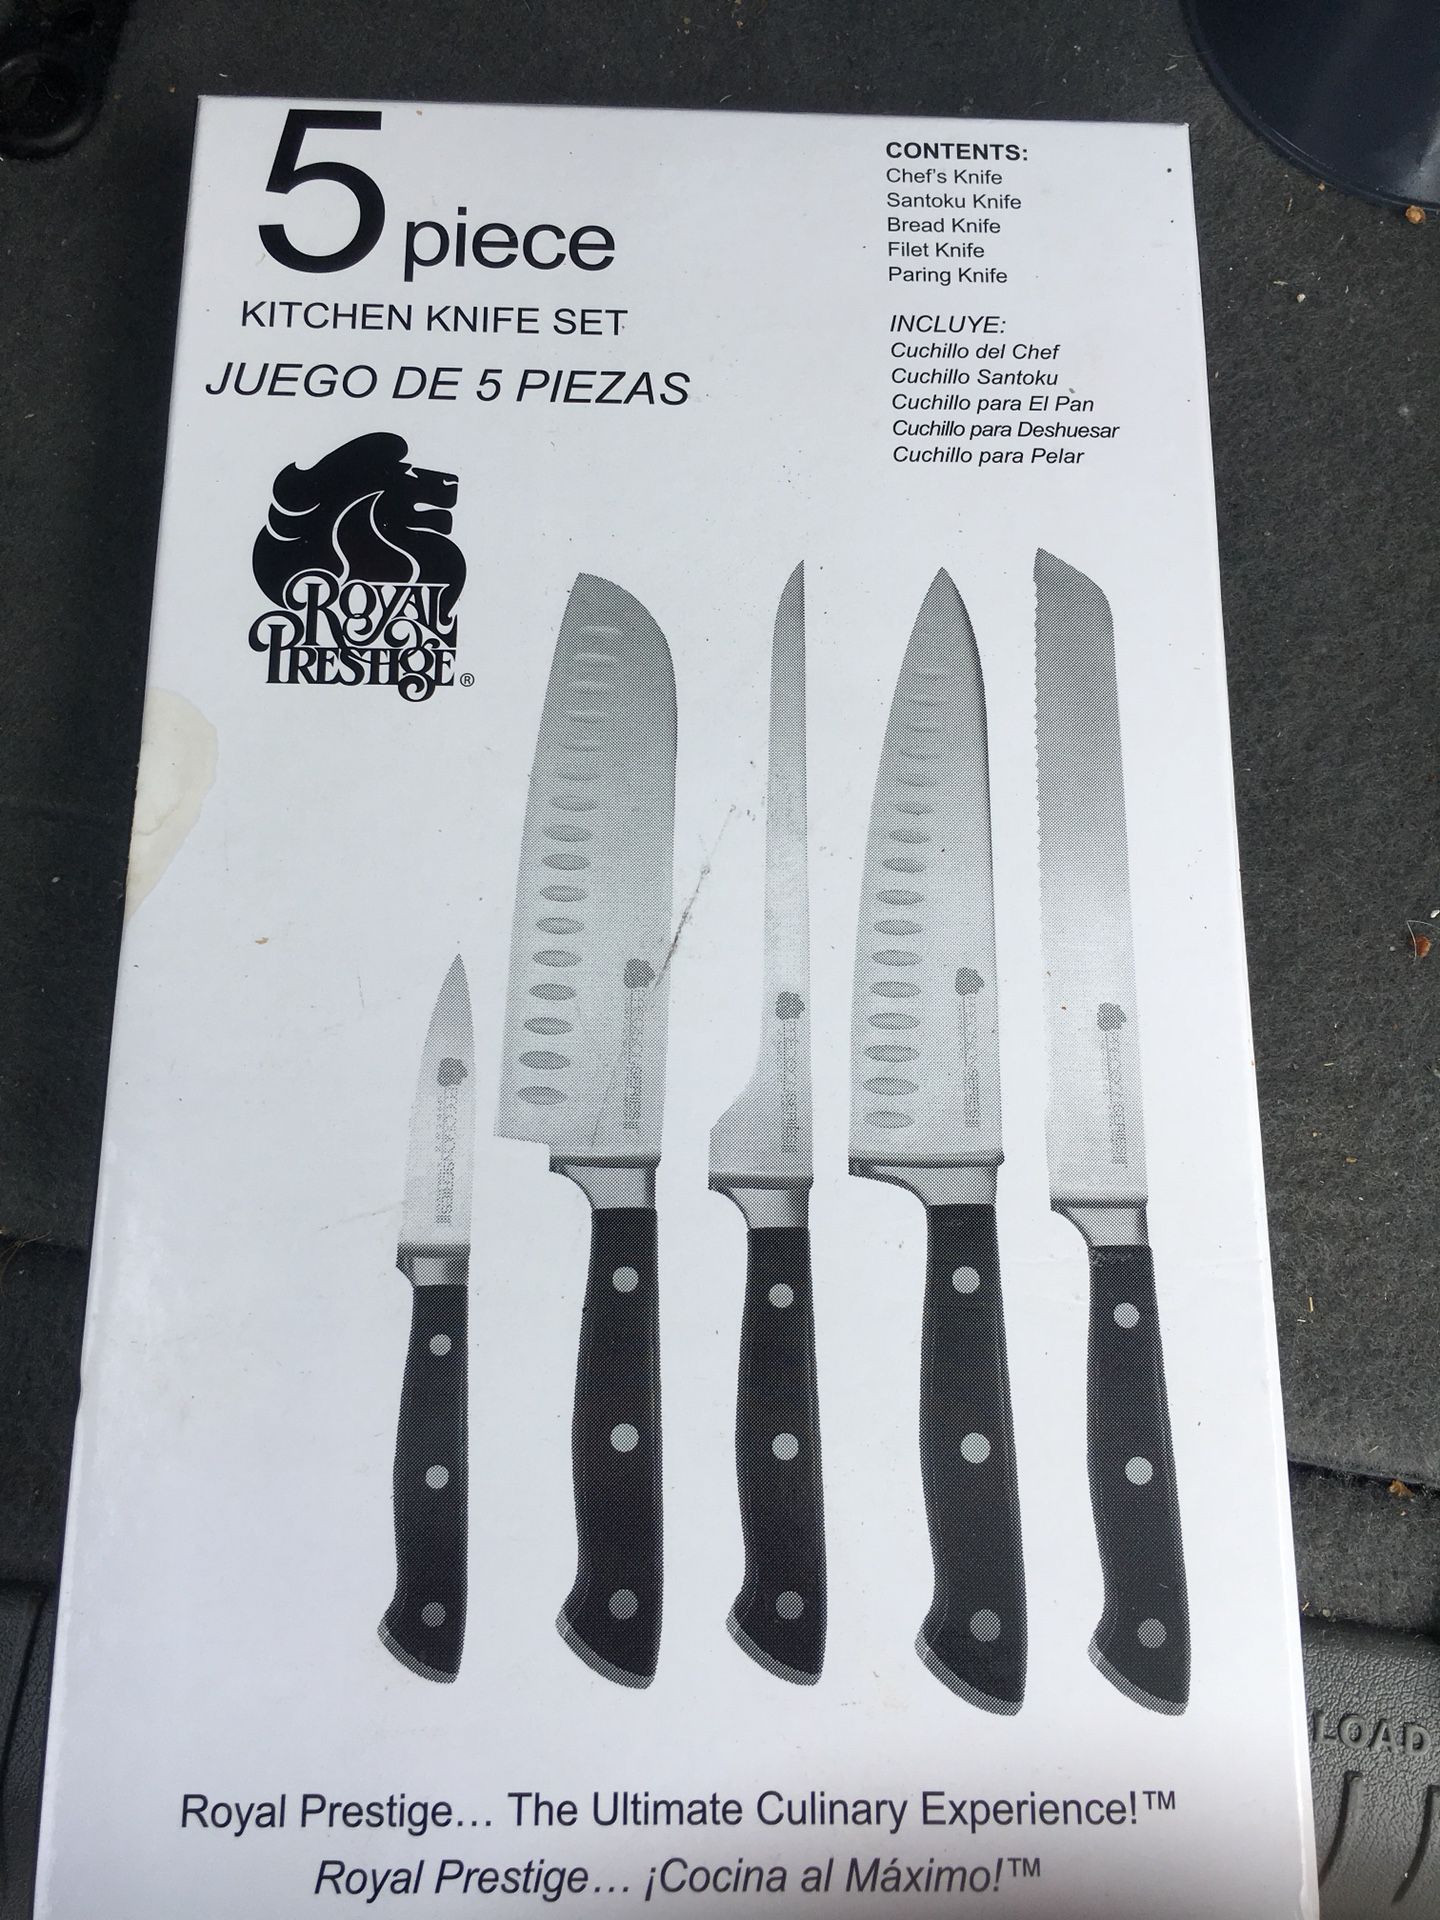 14 piece tomodachi knife set for Sale in Mint Hill, NC - OfferUp